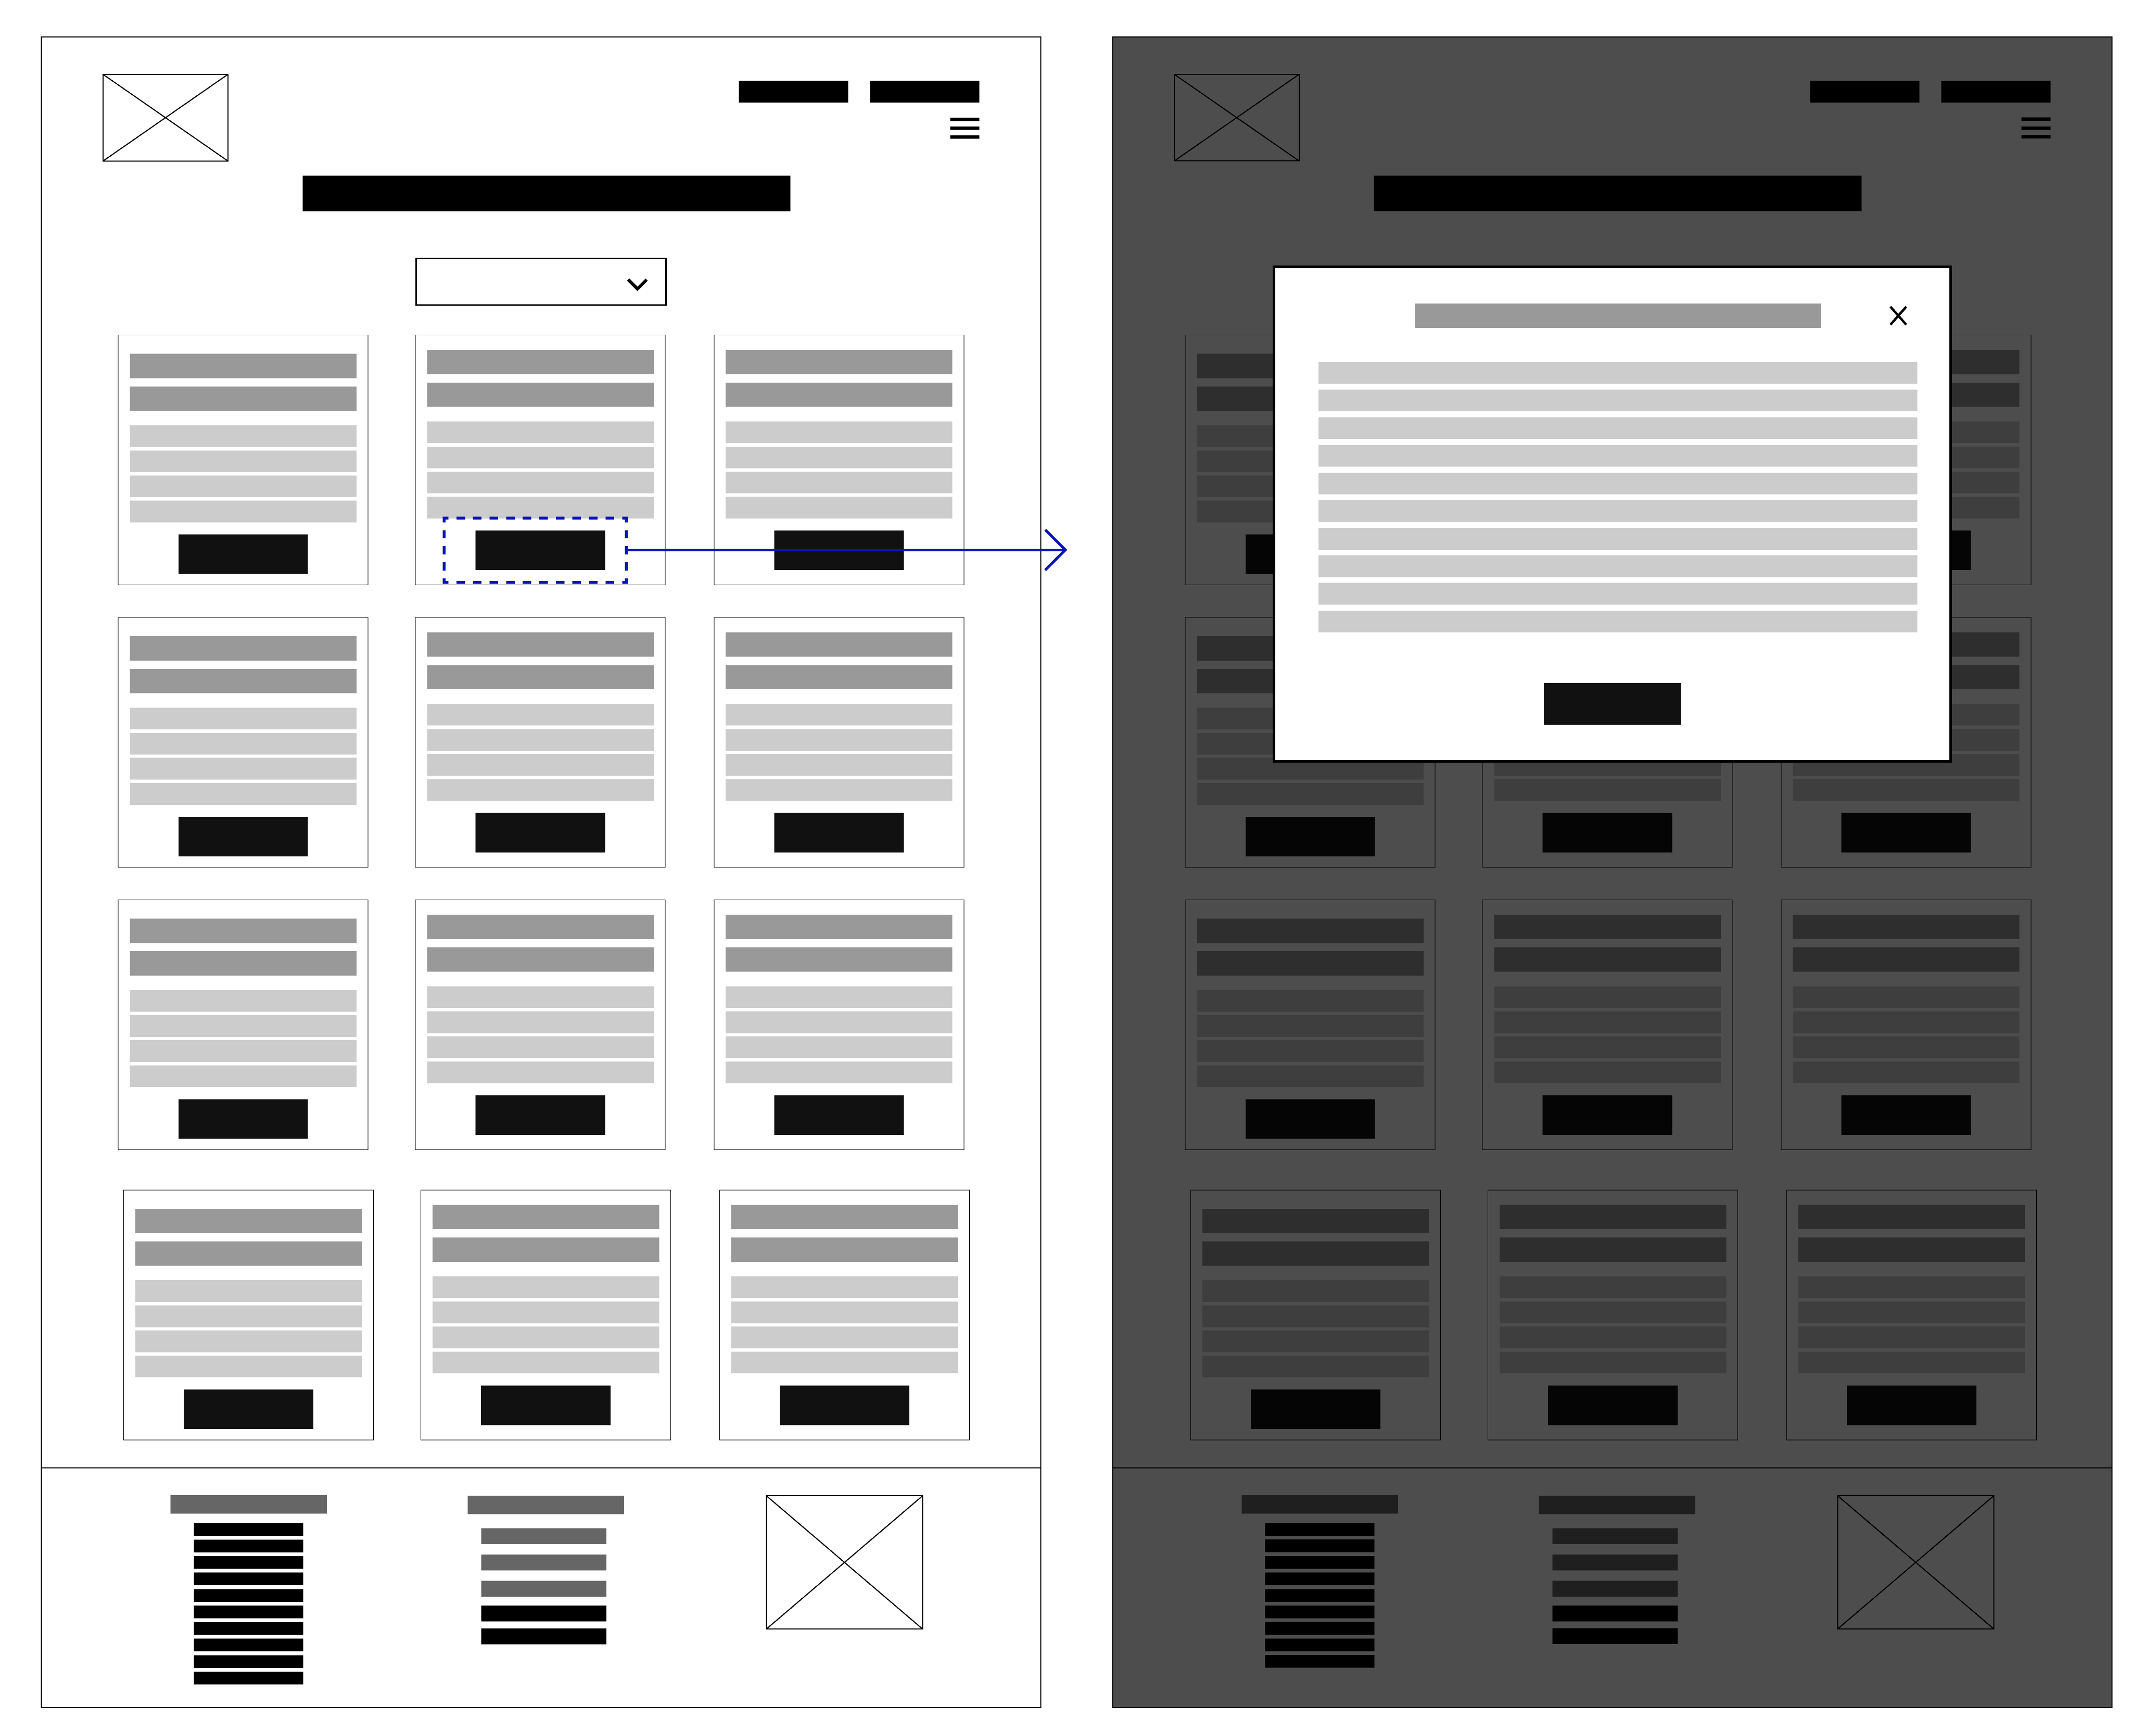 wireframe for In-person Workshops and Online Courses as described above.